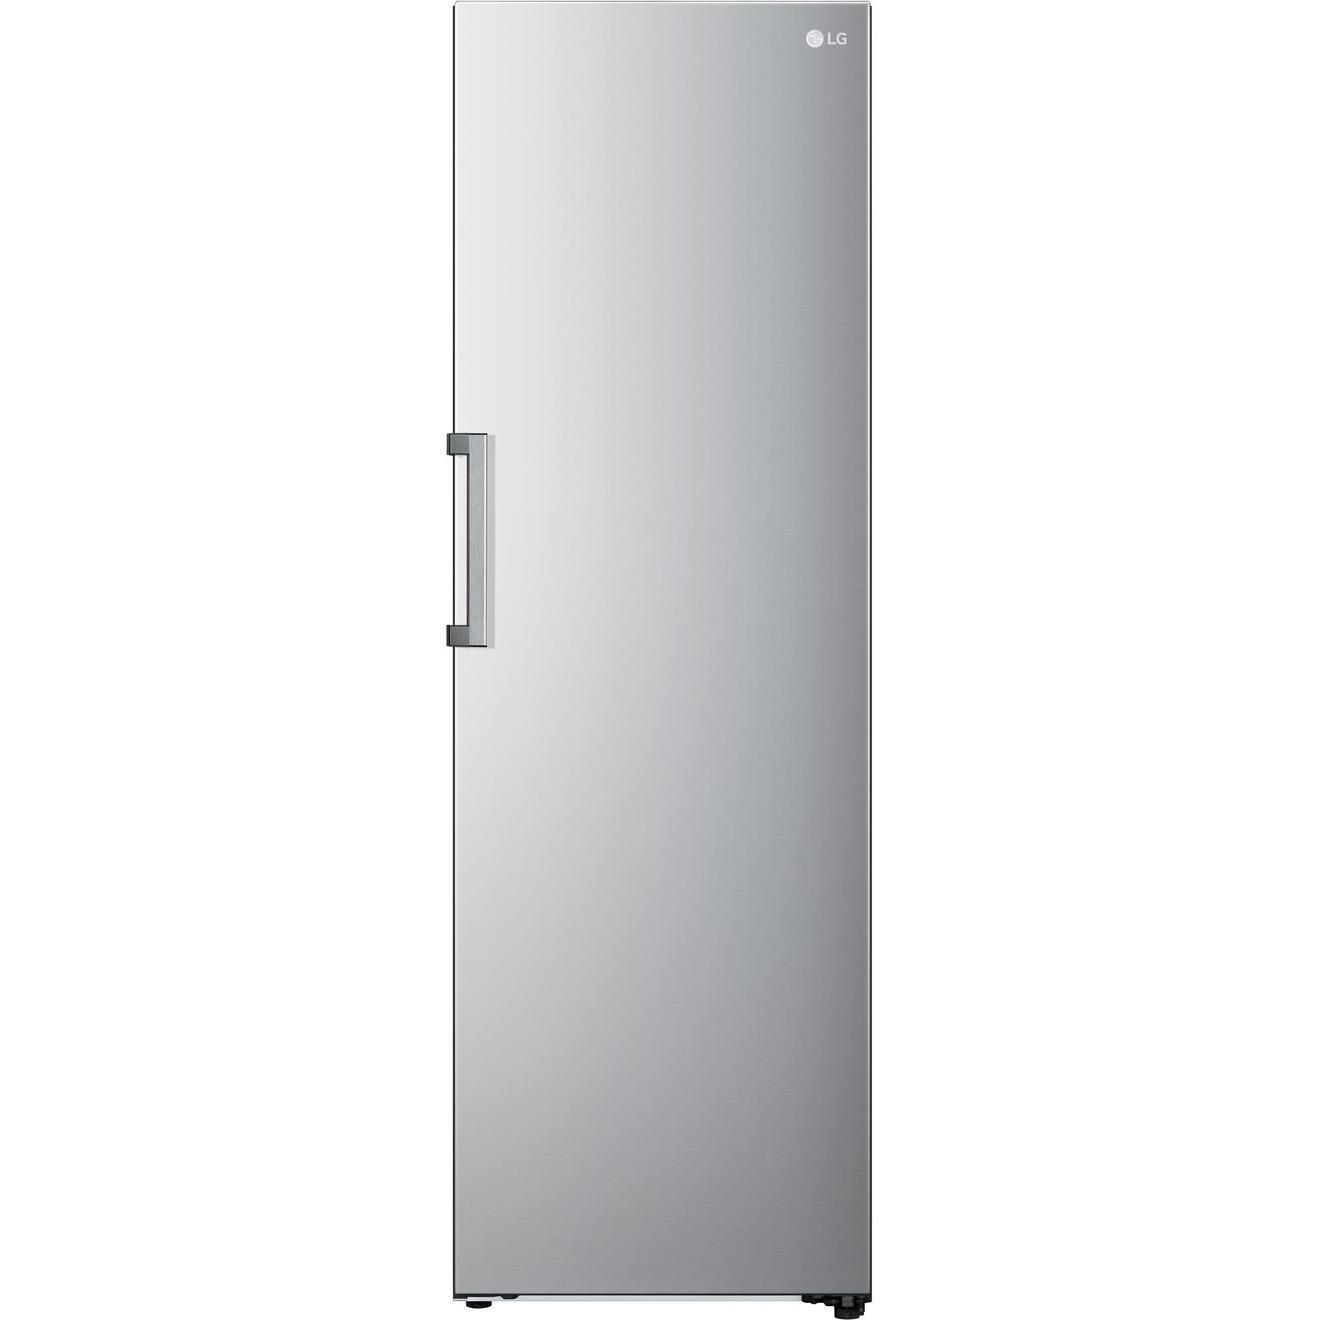 LG 13.6 cu.ft. Counter-Depth All Refrigerator offers at $999.98 in Trail Appliances